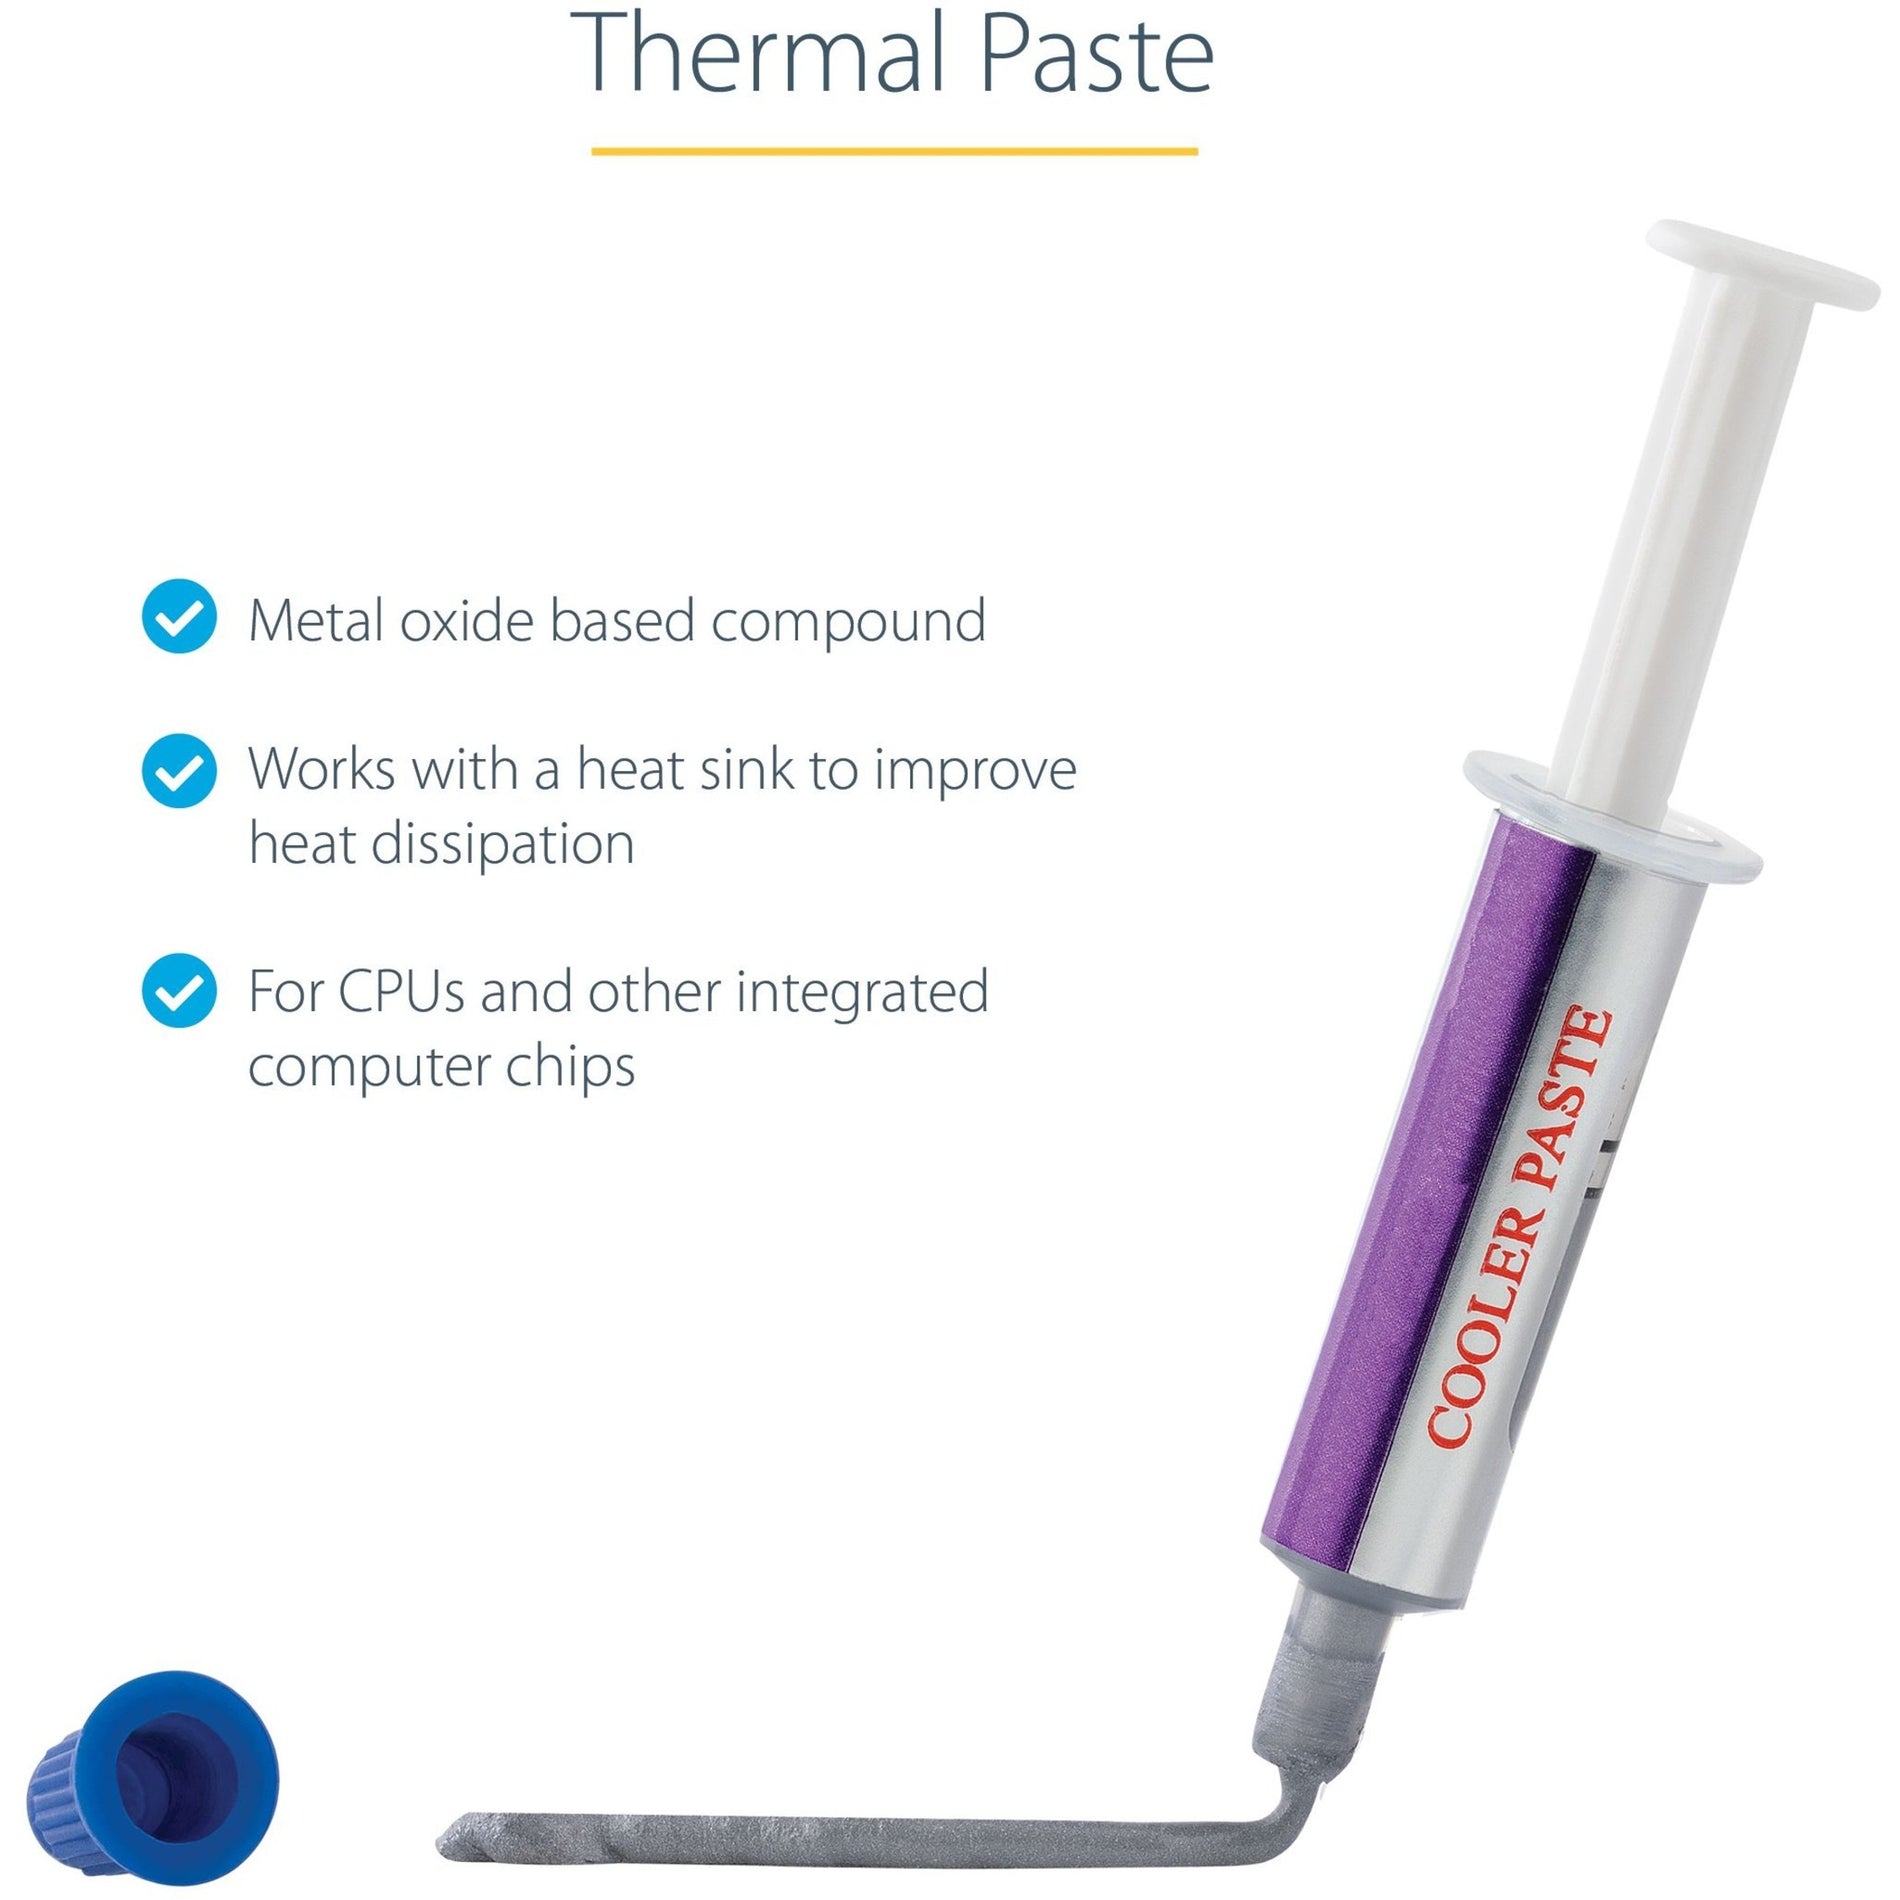 StarTech.com SILVGREASE1 Metal Oxide Thermal CPU Paste Compound Tube (1.5g), Better Thermal Conductivity, Safe for High Performance Applications